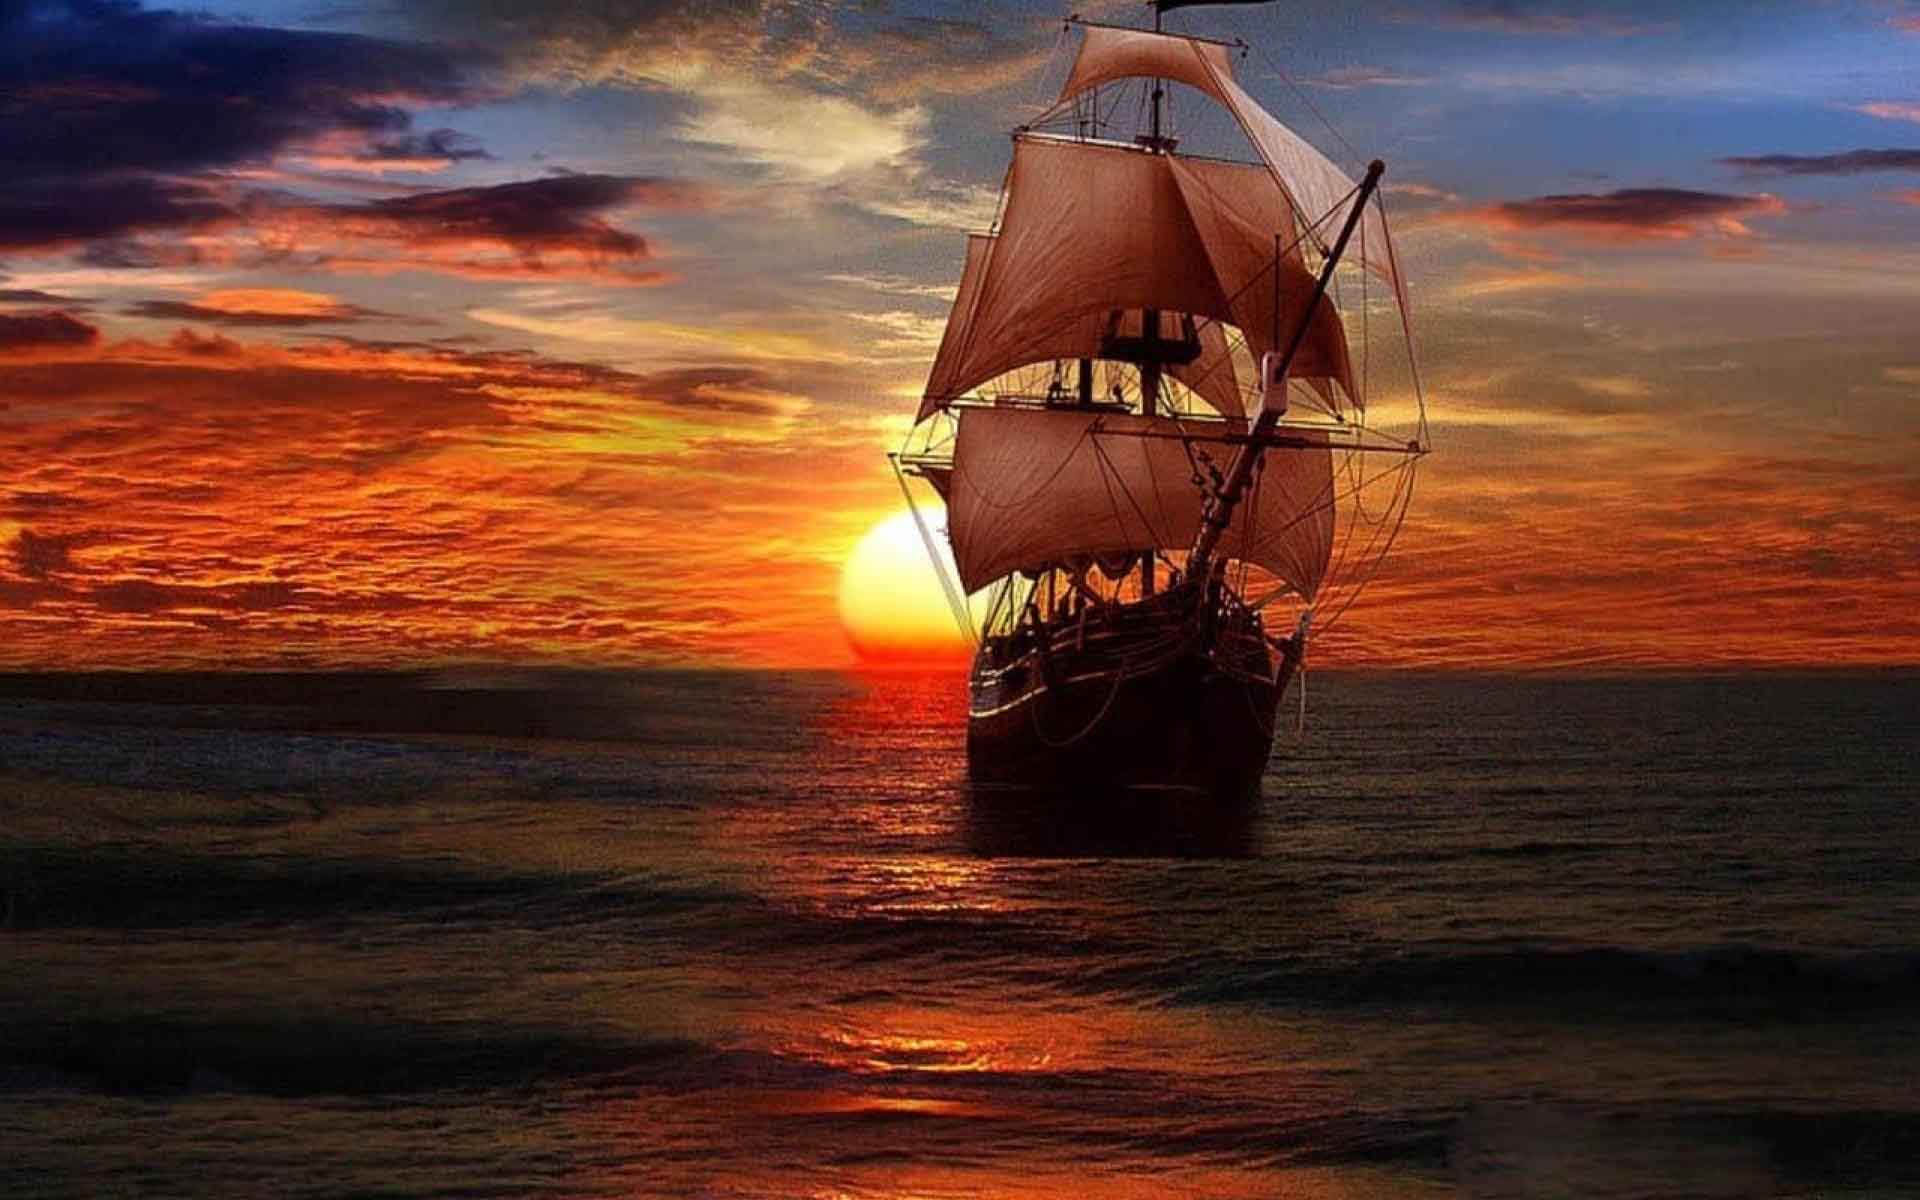 A sailboat in the ocean at sunset - Pirate